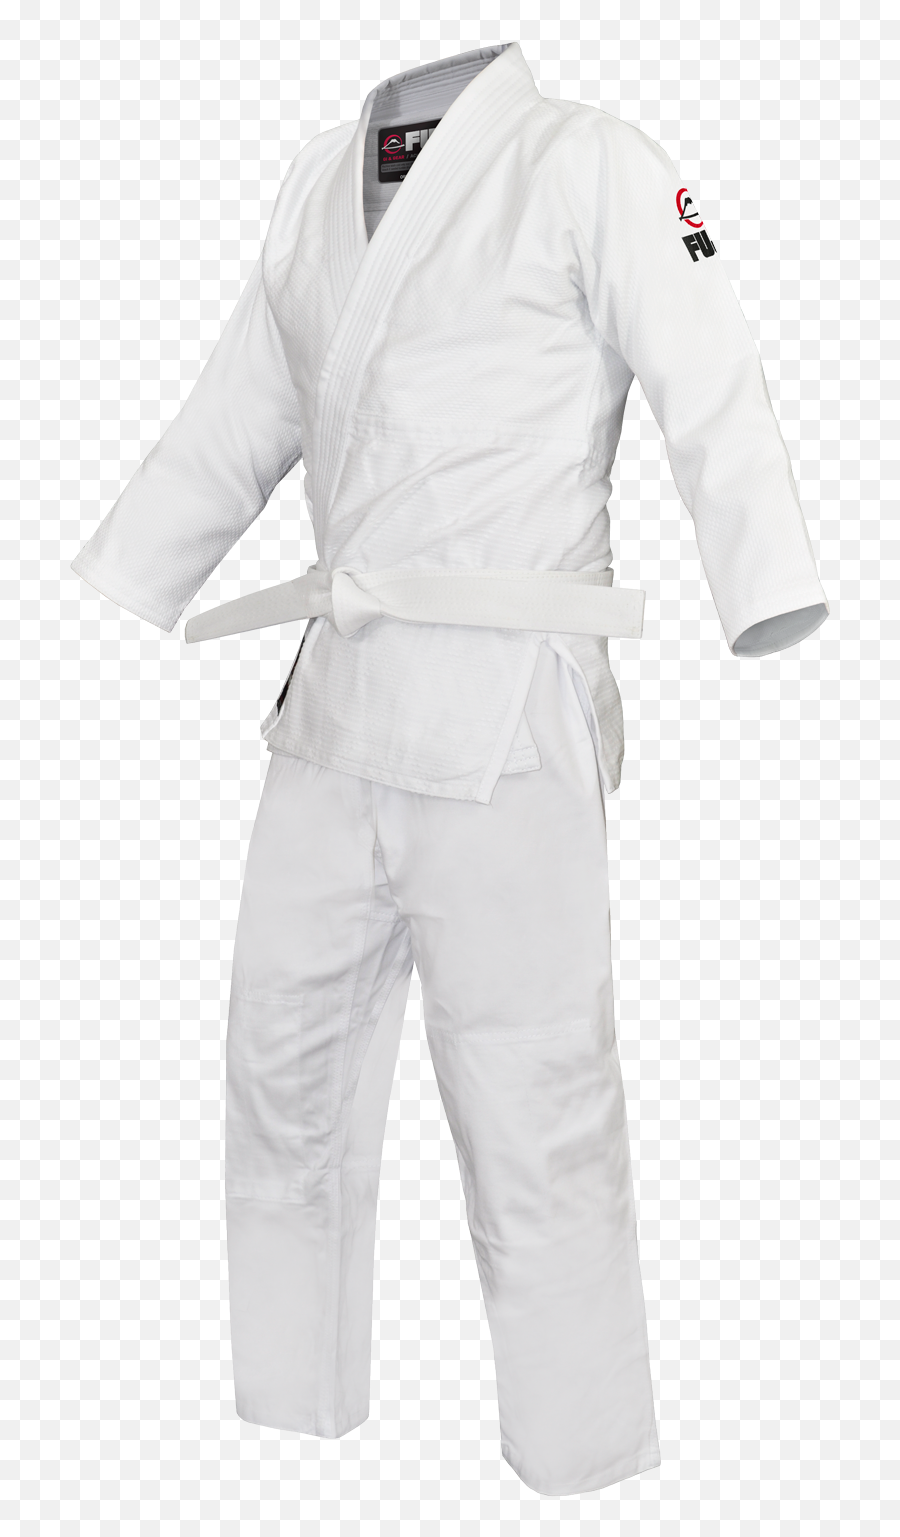 85 Judge Png Image Collection For Free Download - Fuji Sports Double Weave Judo Gi,Weave Png